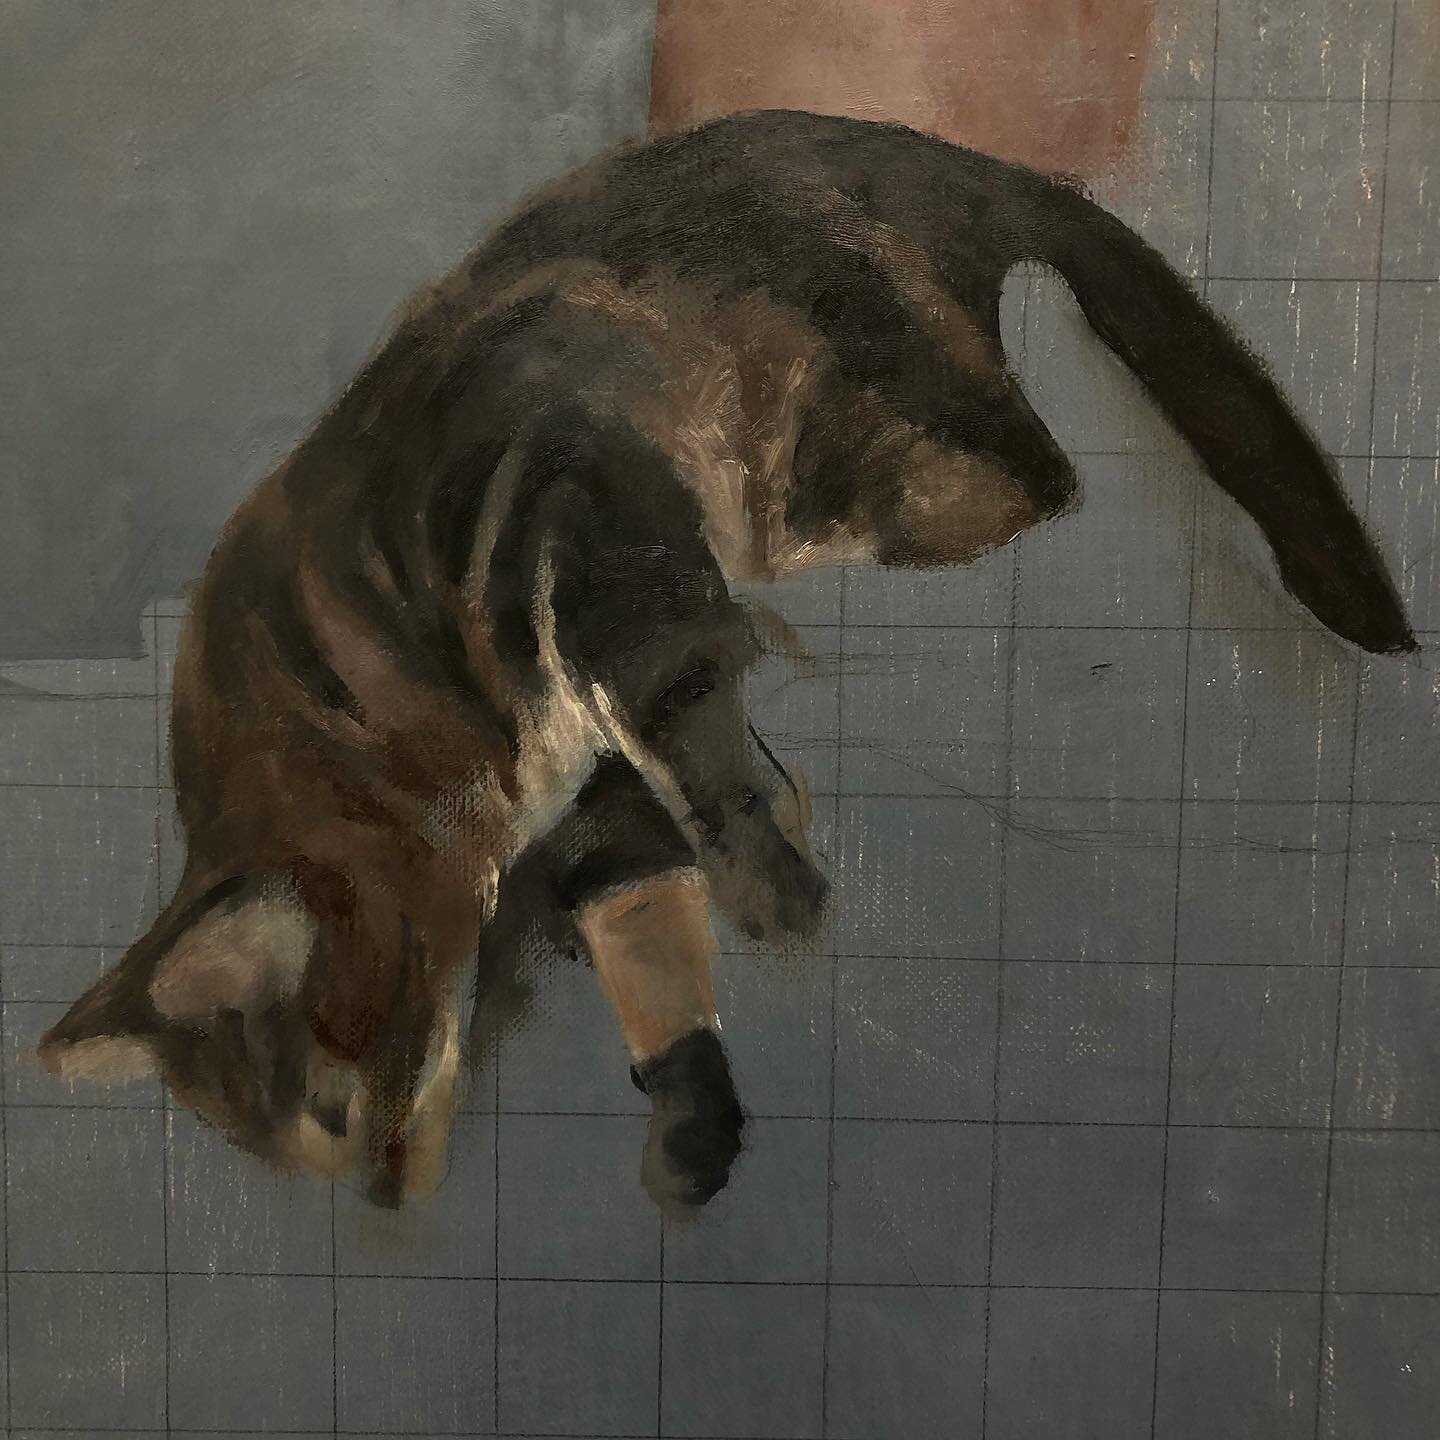 This part looks more like a cat struggling to be free than bricks, so I&rsquo;m going to add some hind legs and roll with it.